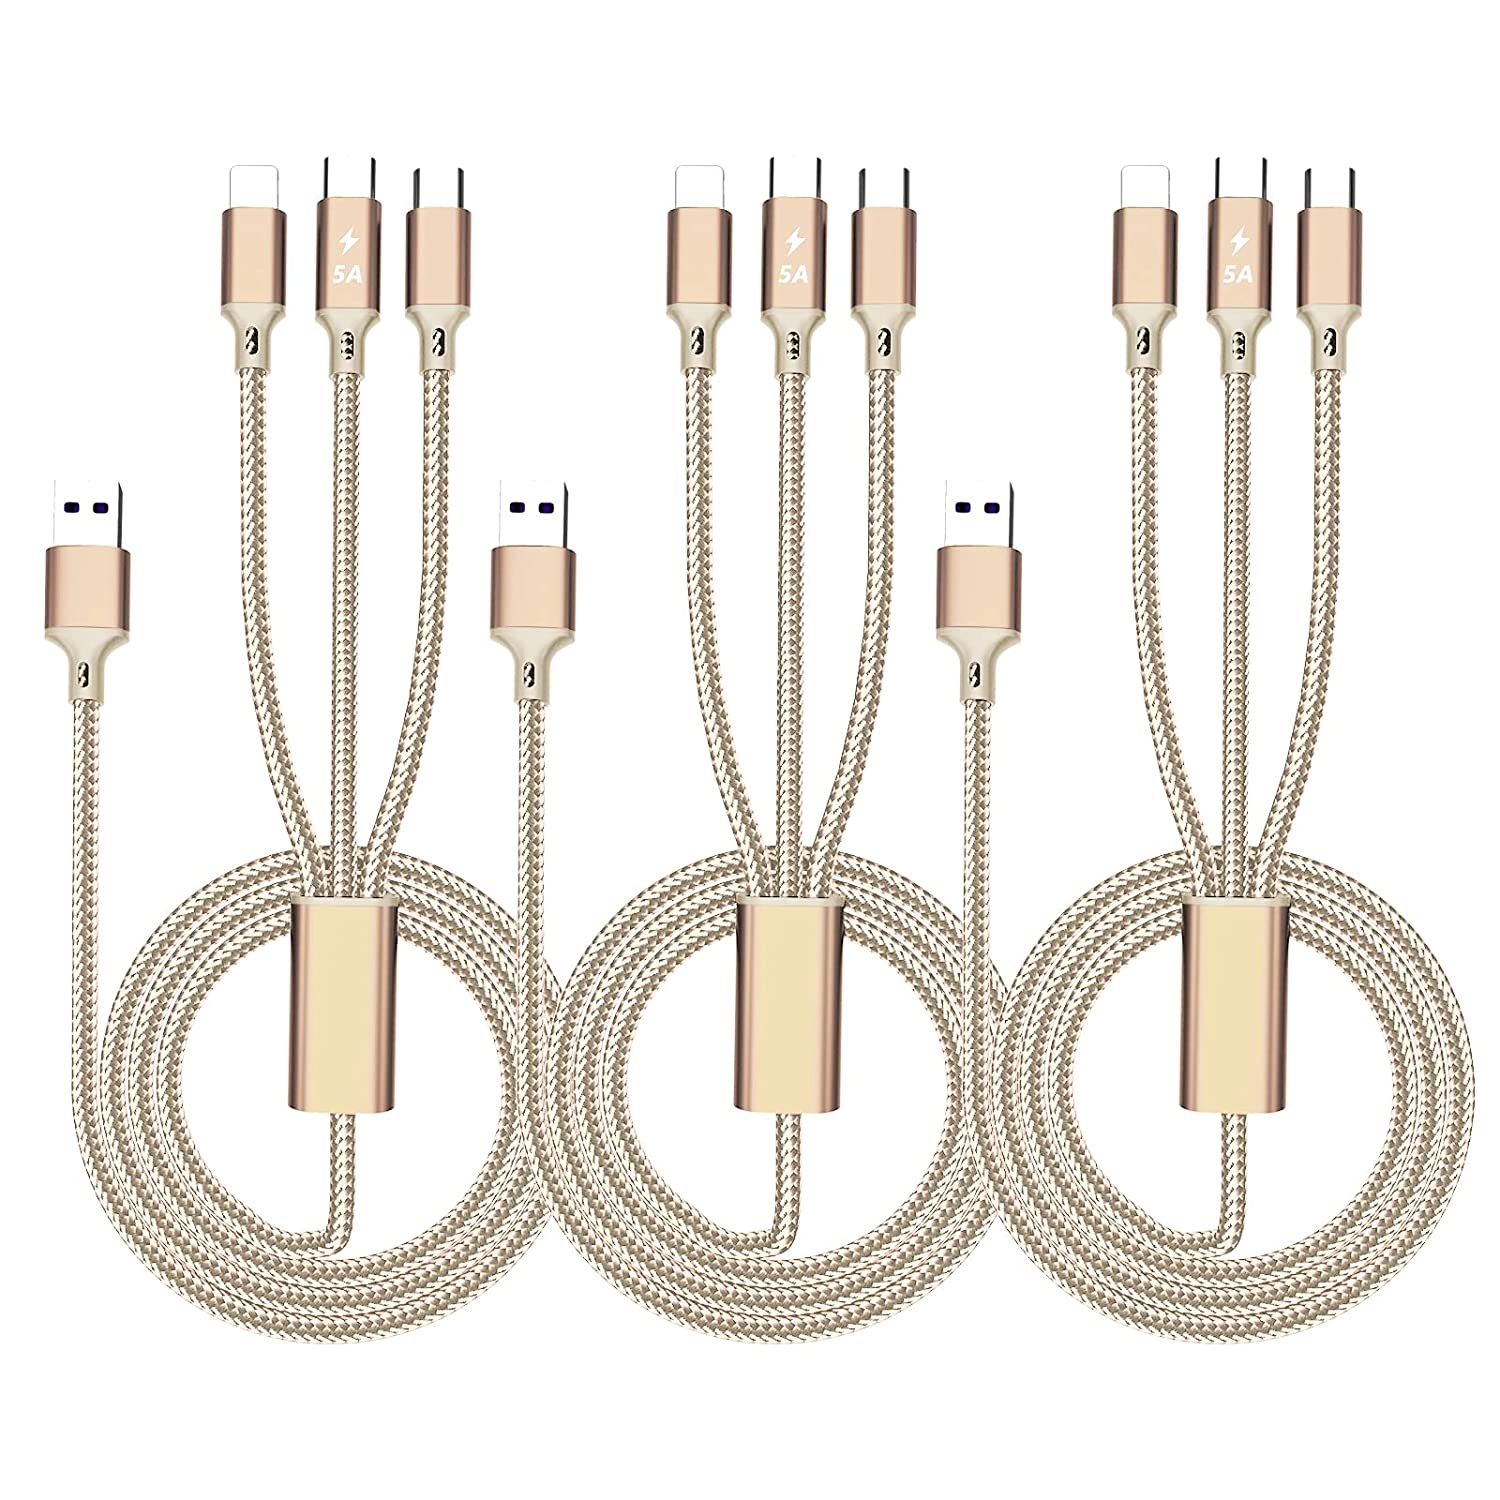 3 in 1 Multi USB Charger Charging Cable Cord with 3 Type-C Plug Nylon Braided